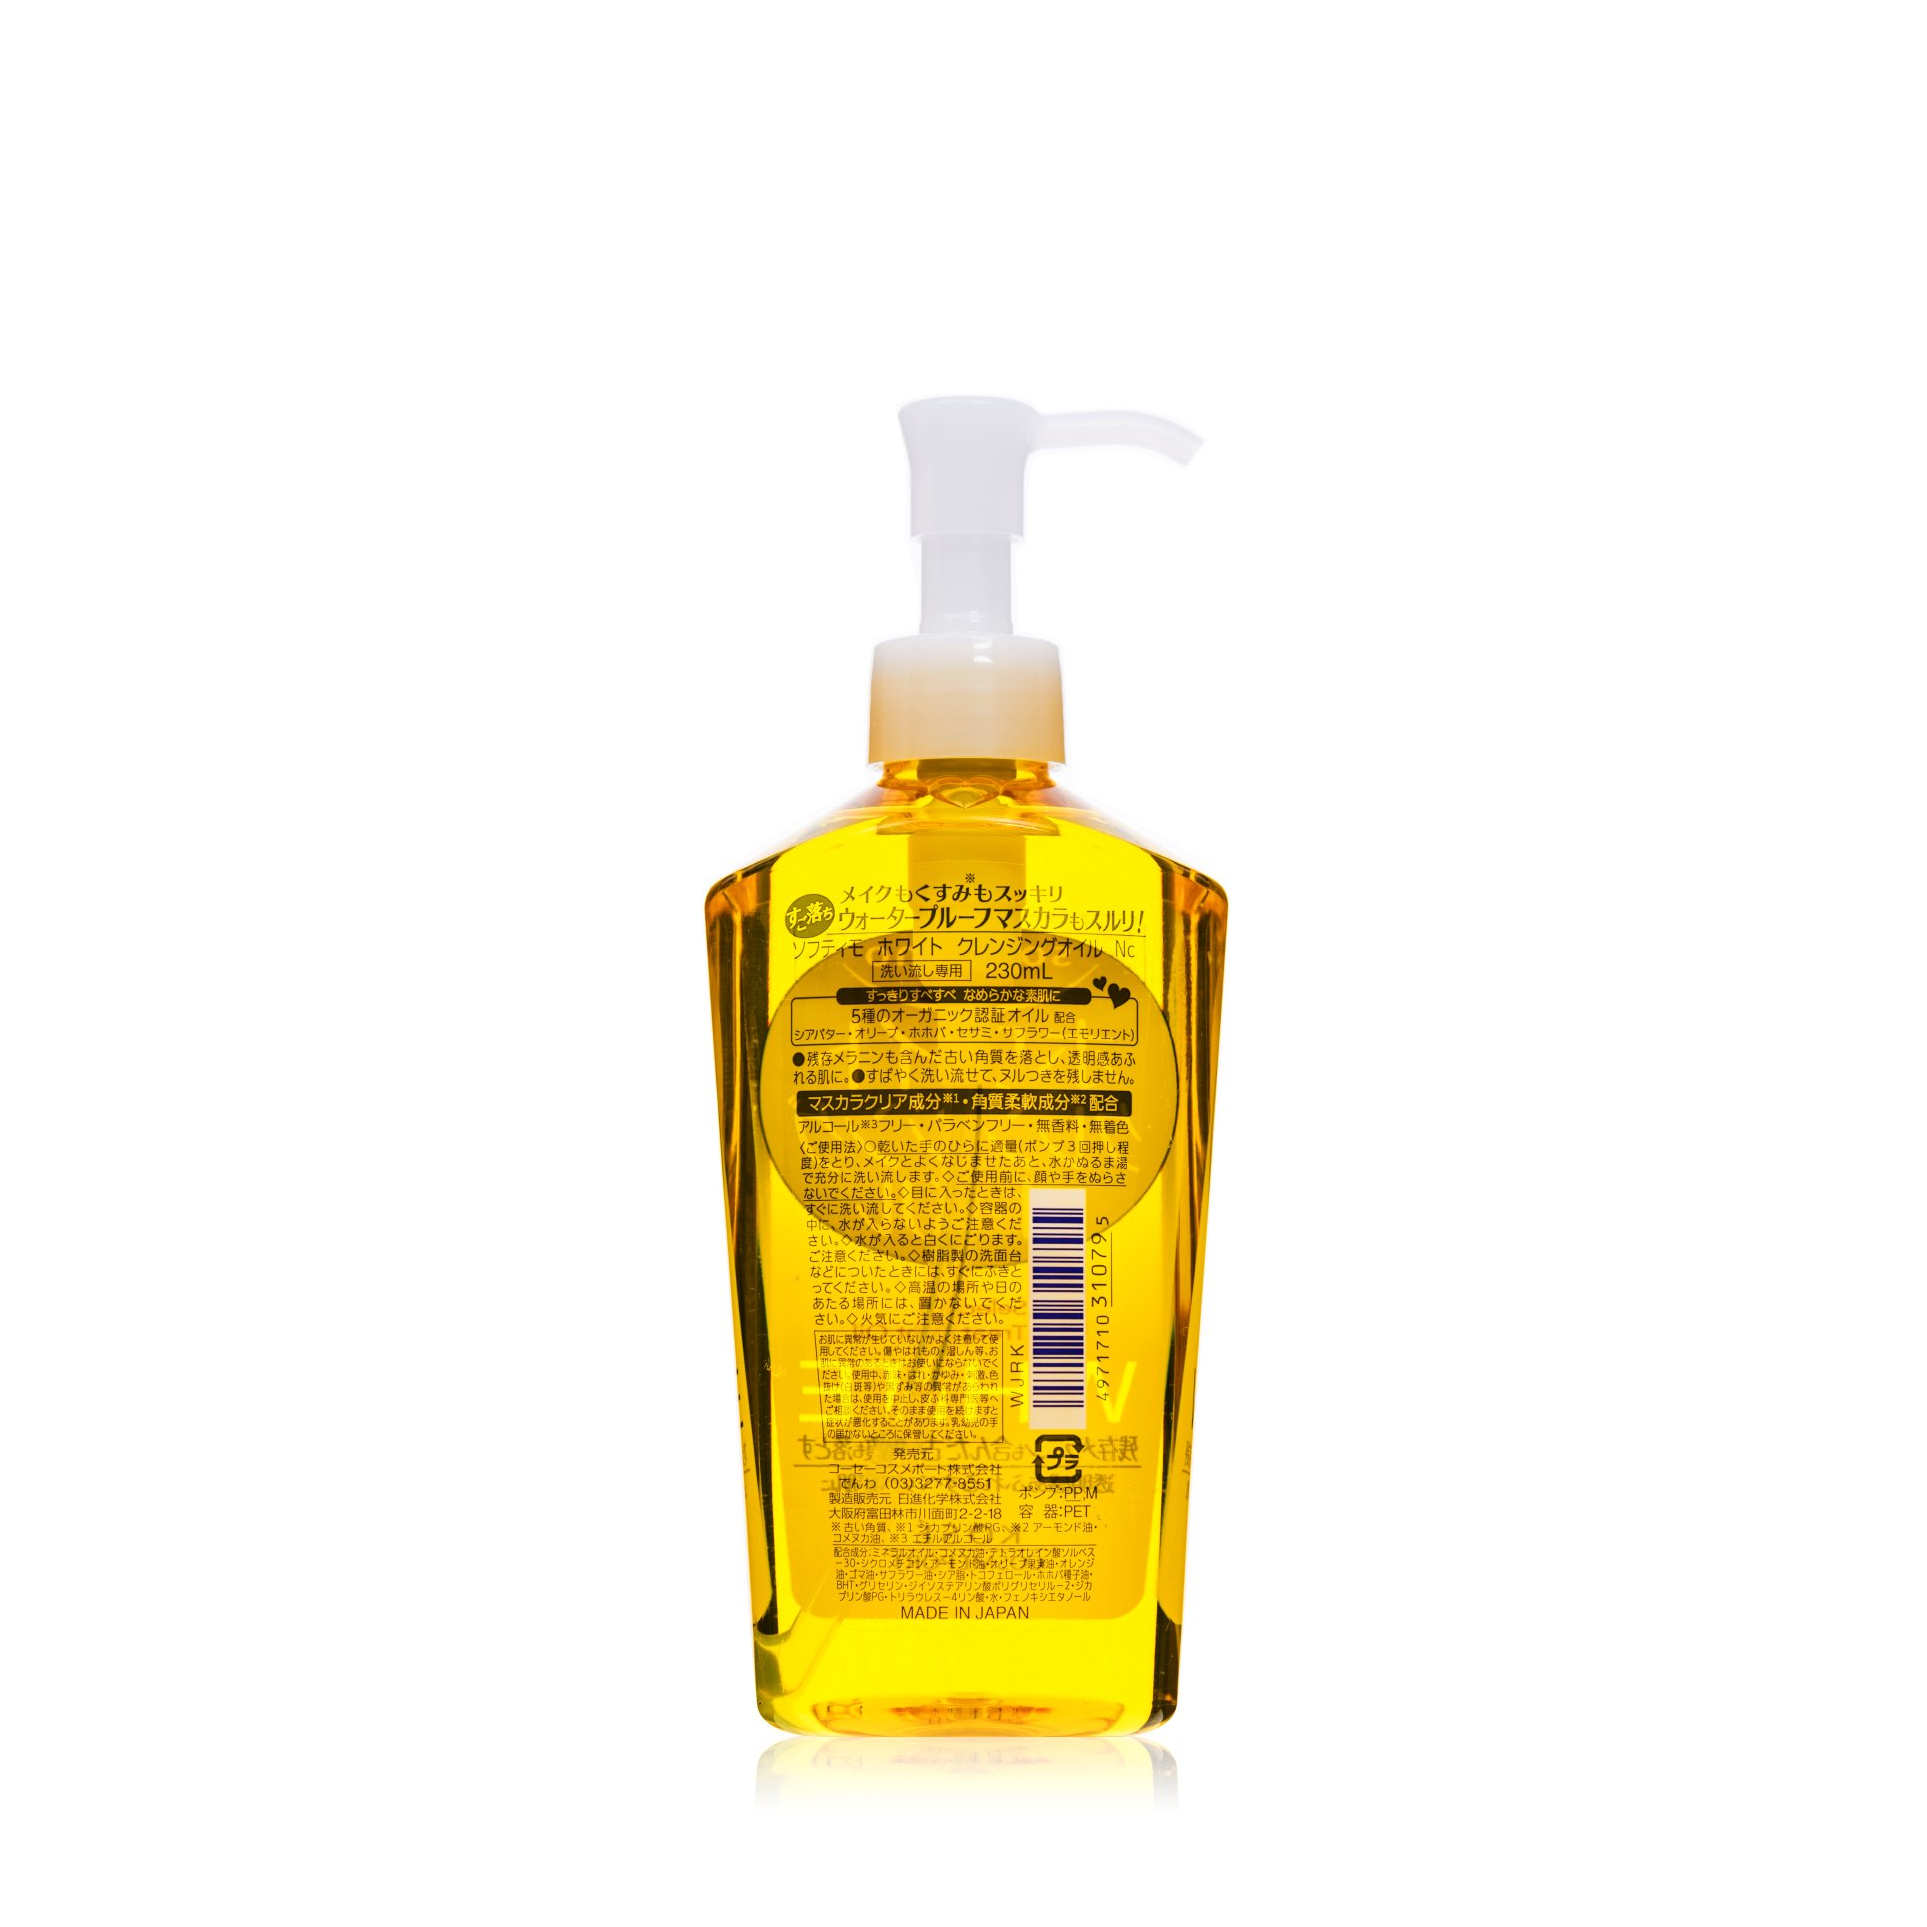 Softymo White Cleansing Oil